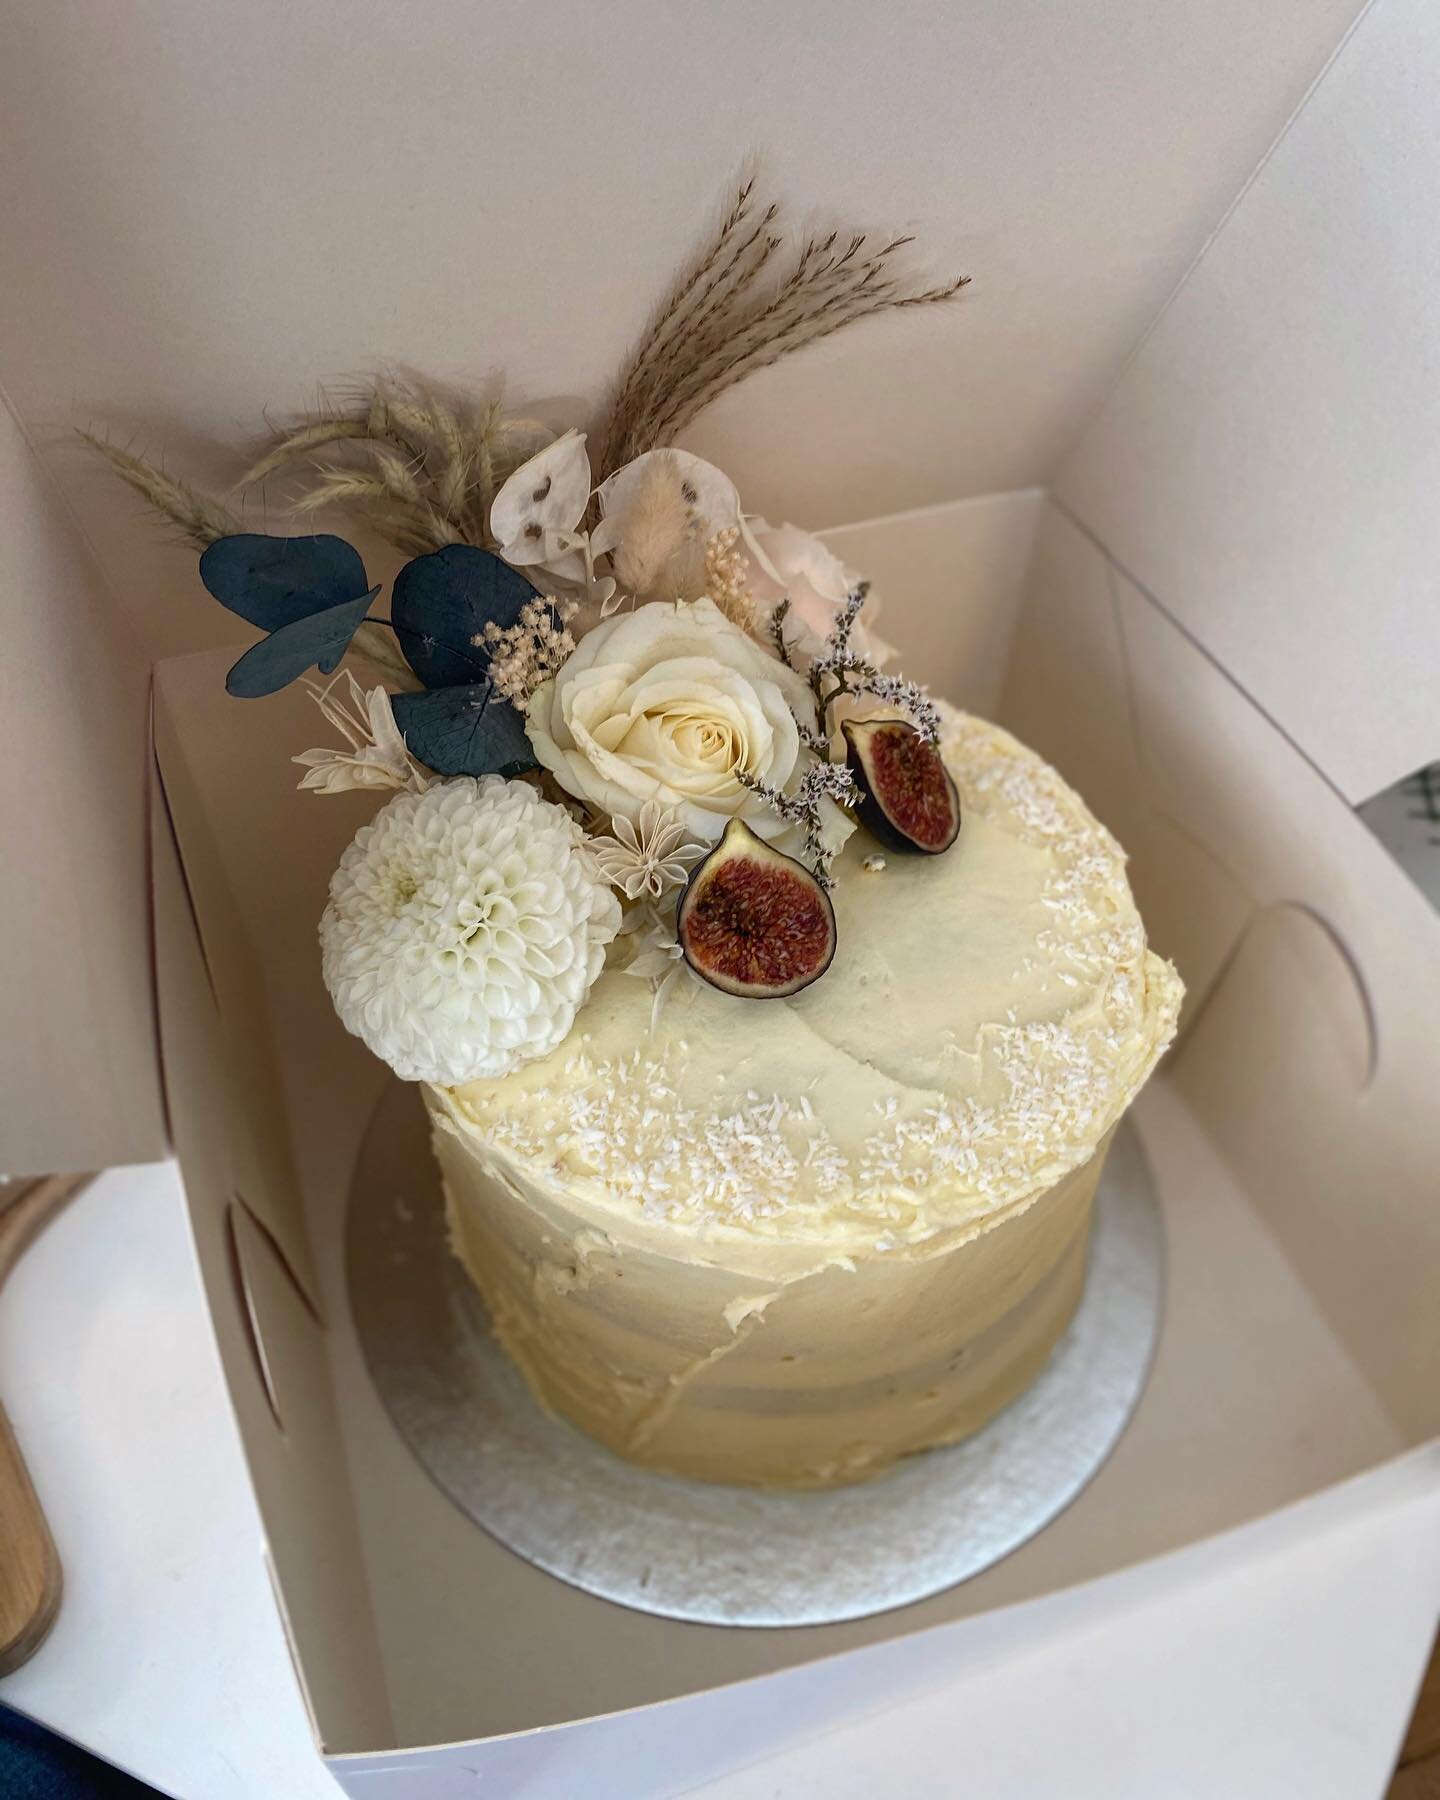 BACK TO WORK no rest for the wicked! We made this beautiful cake this weekend for a lovely lady&rsquo;s birthday party. Inspired by my own wedding cake from @thegingerbearbakery we added some dry textures alongside fresh blooms ❤️#honeymoon can wait